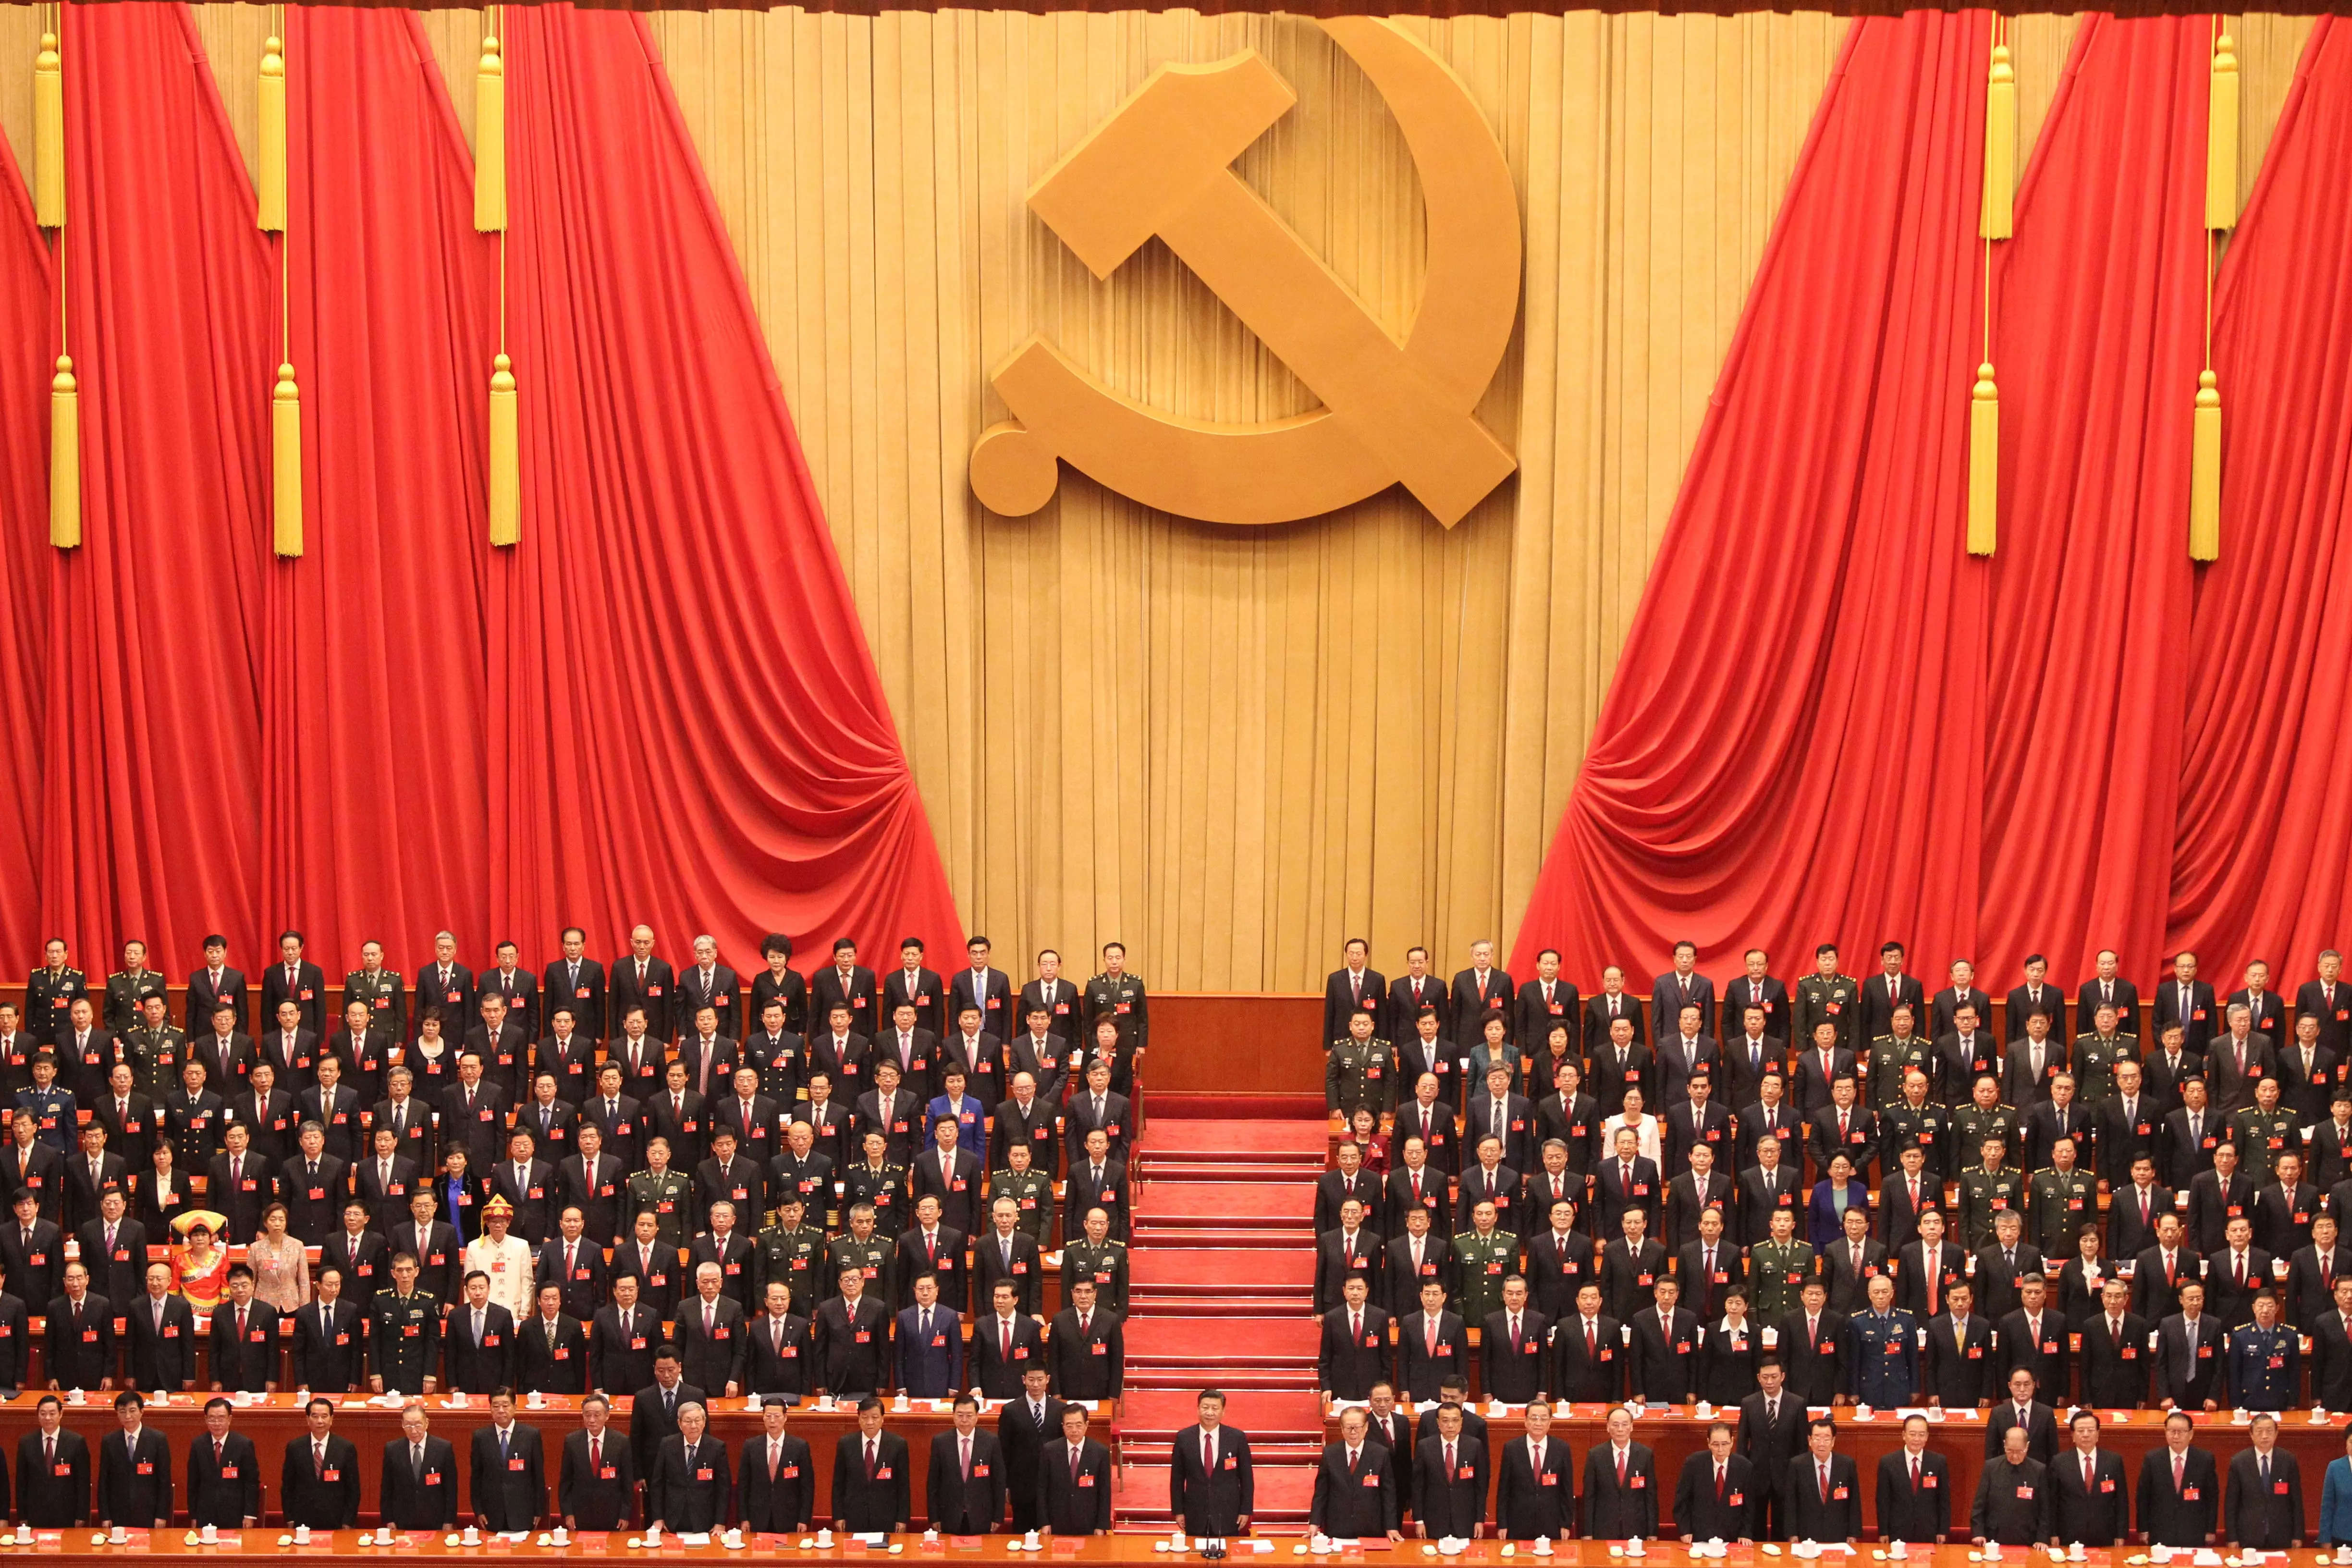 The 19th National Congress of Communist Party of China closed at the Great Hall of the People in Beijing in 2017.